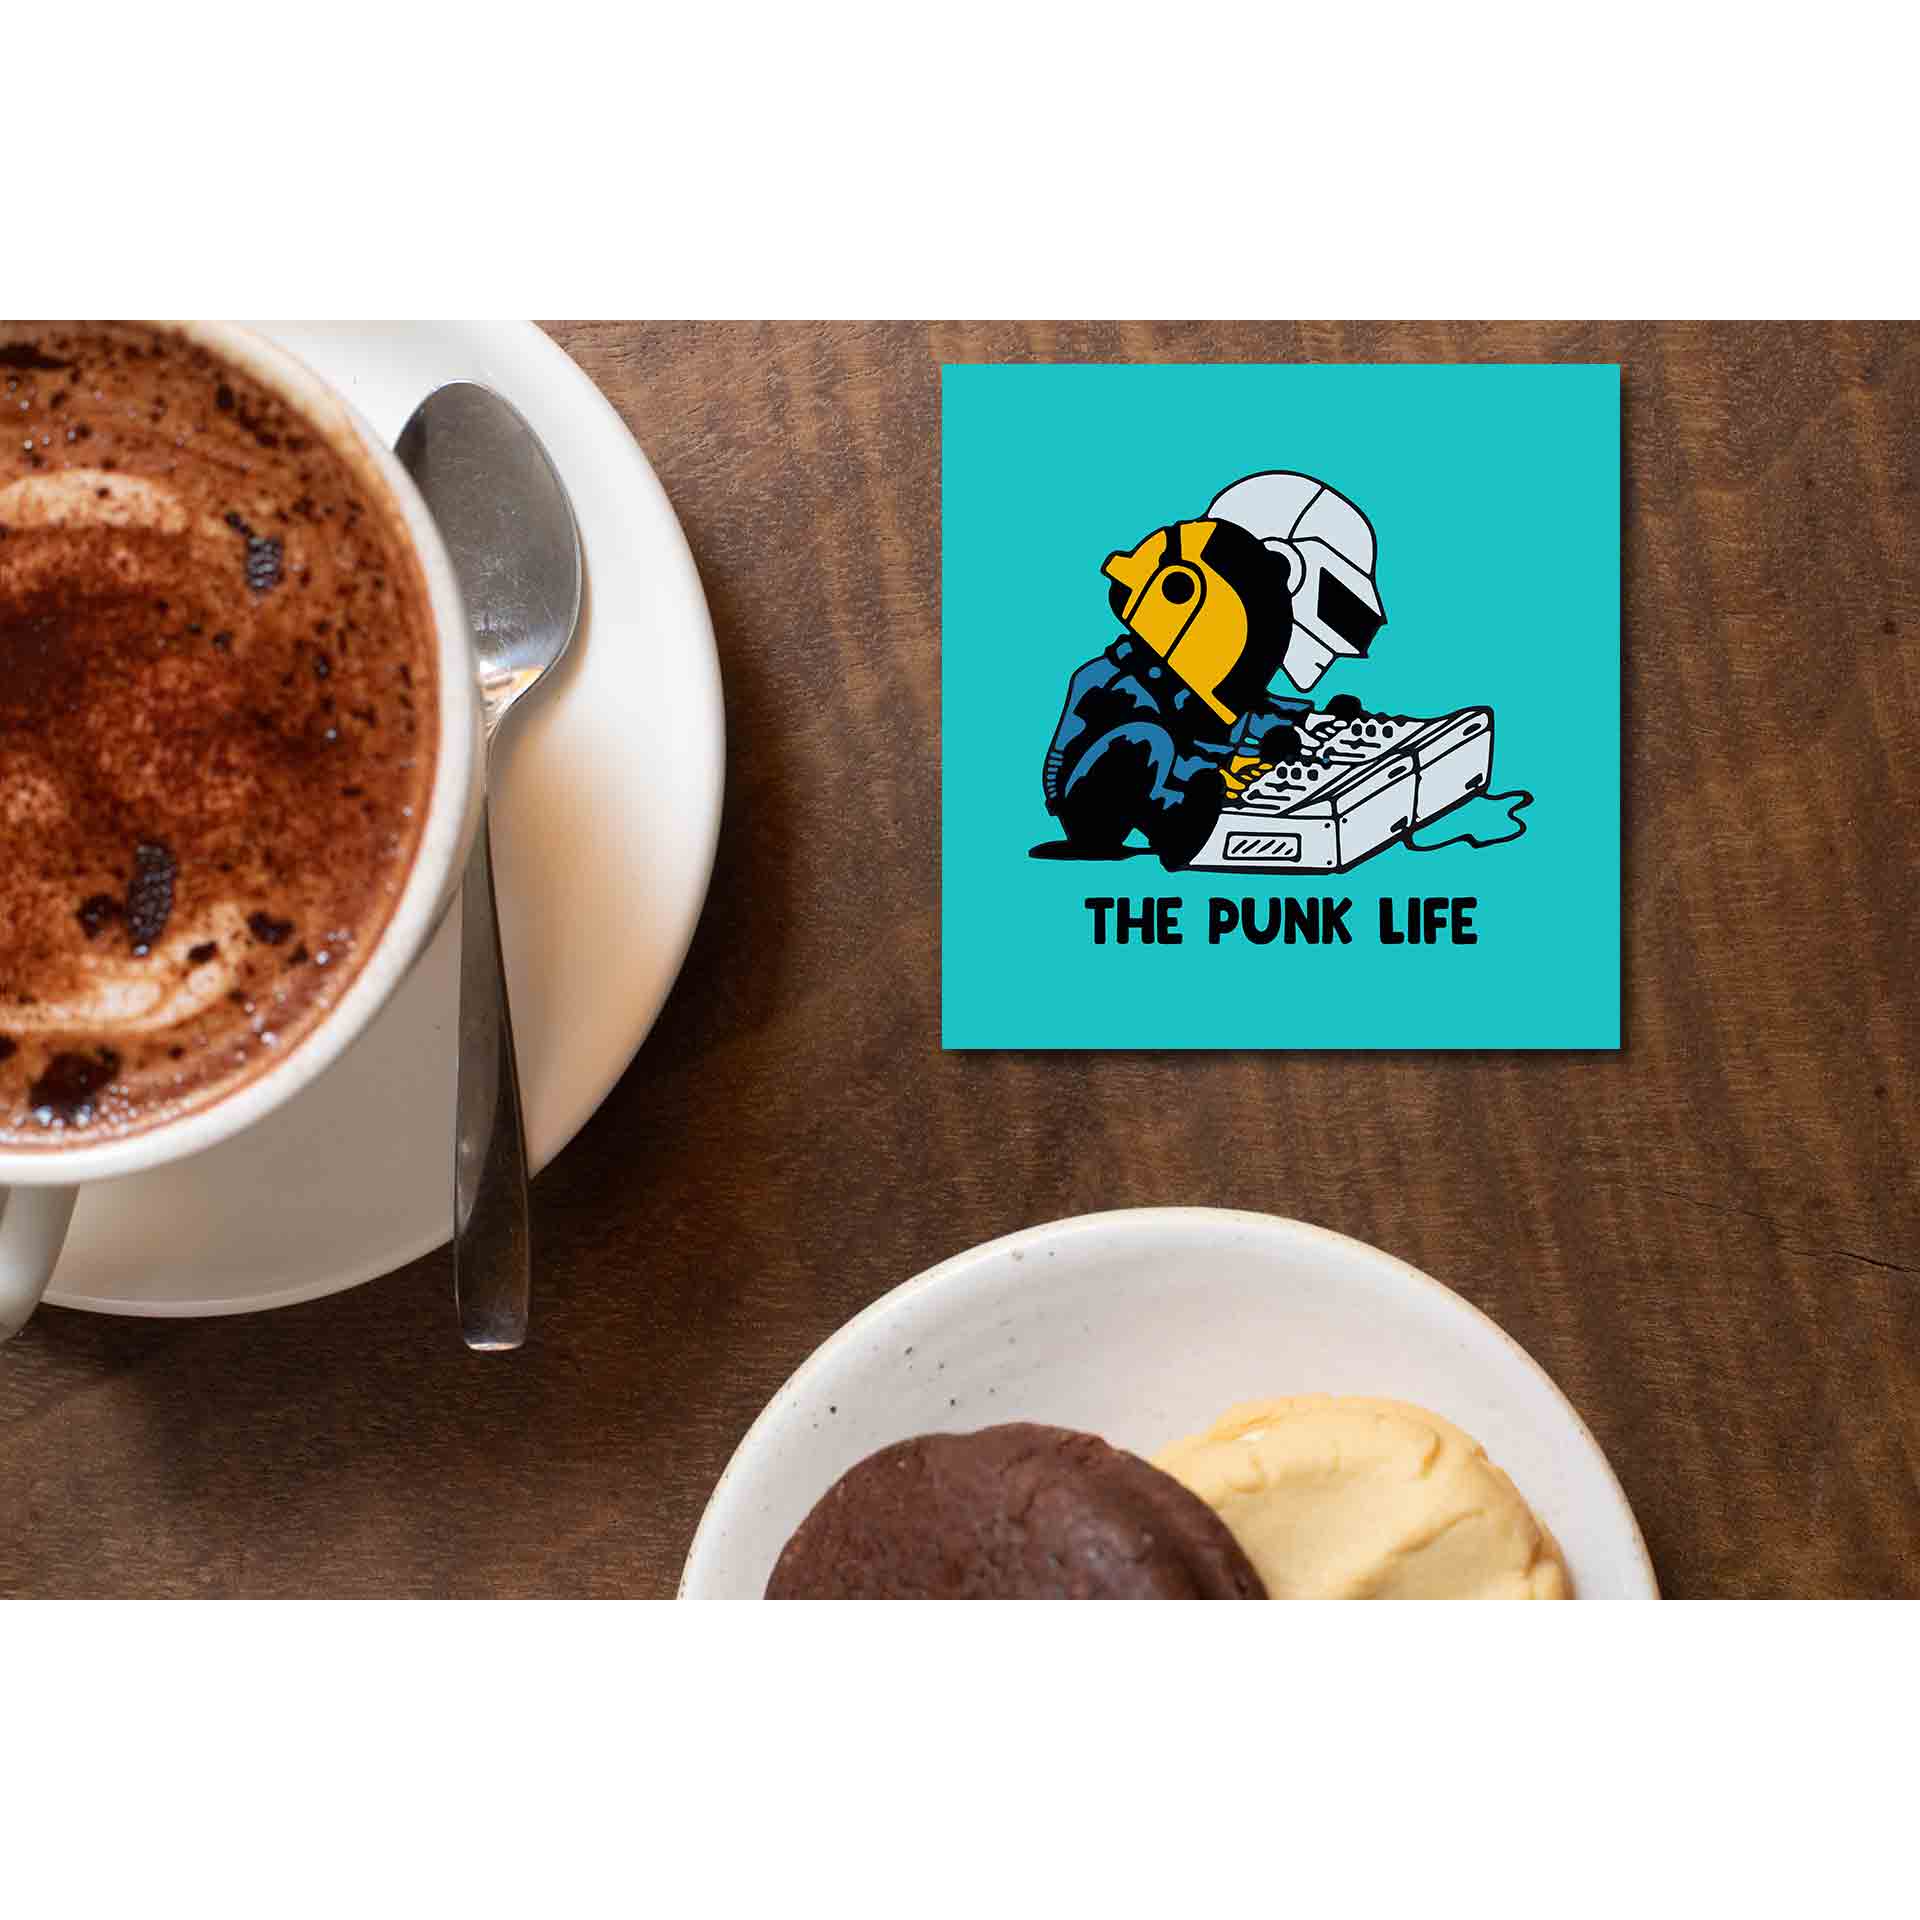 daft punk the punk life coasters wooden table cups indian music band buy online india the banyan tee tbt men women girls boys unisex